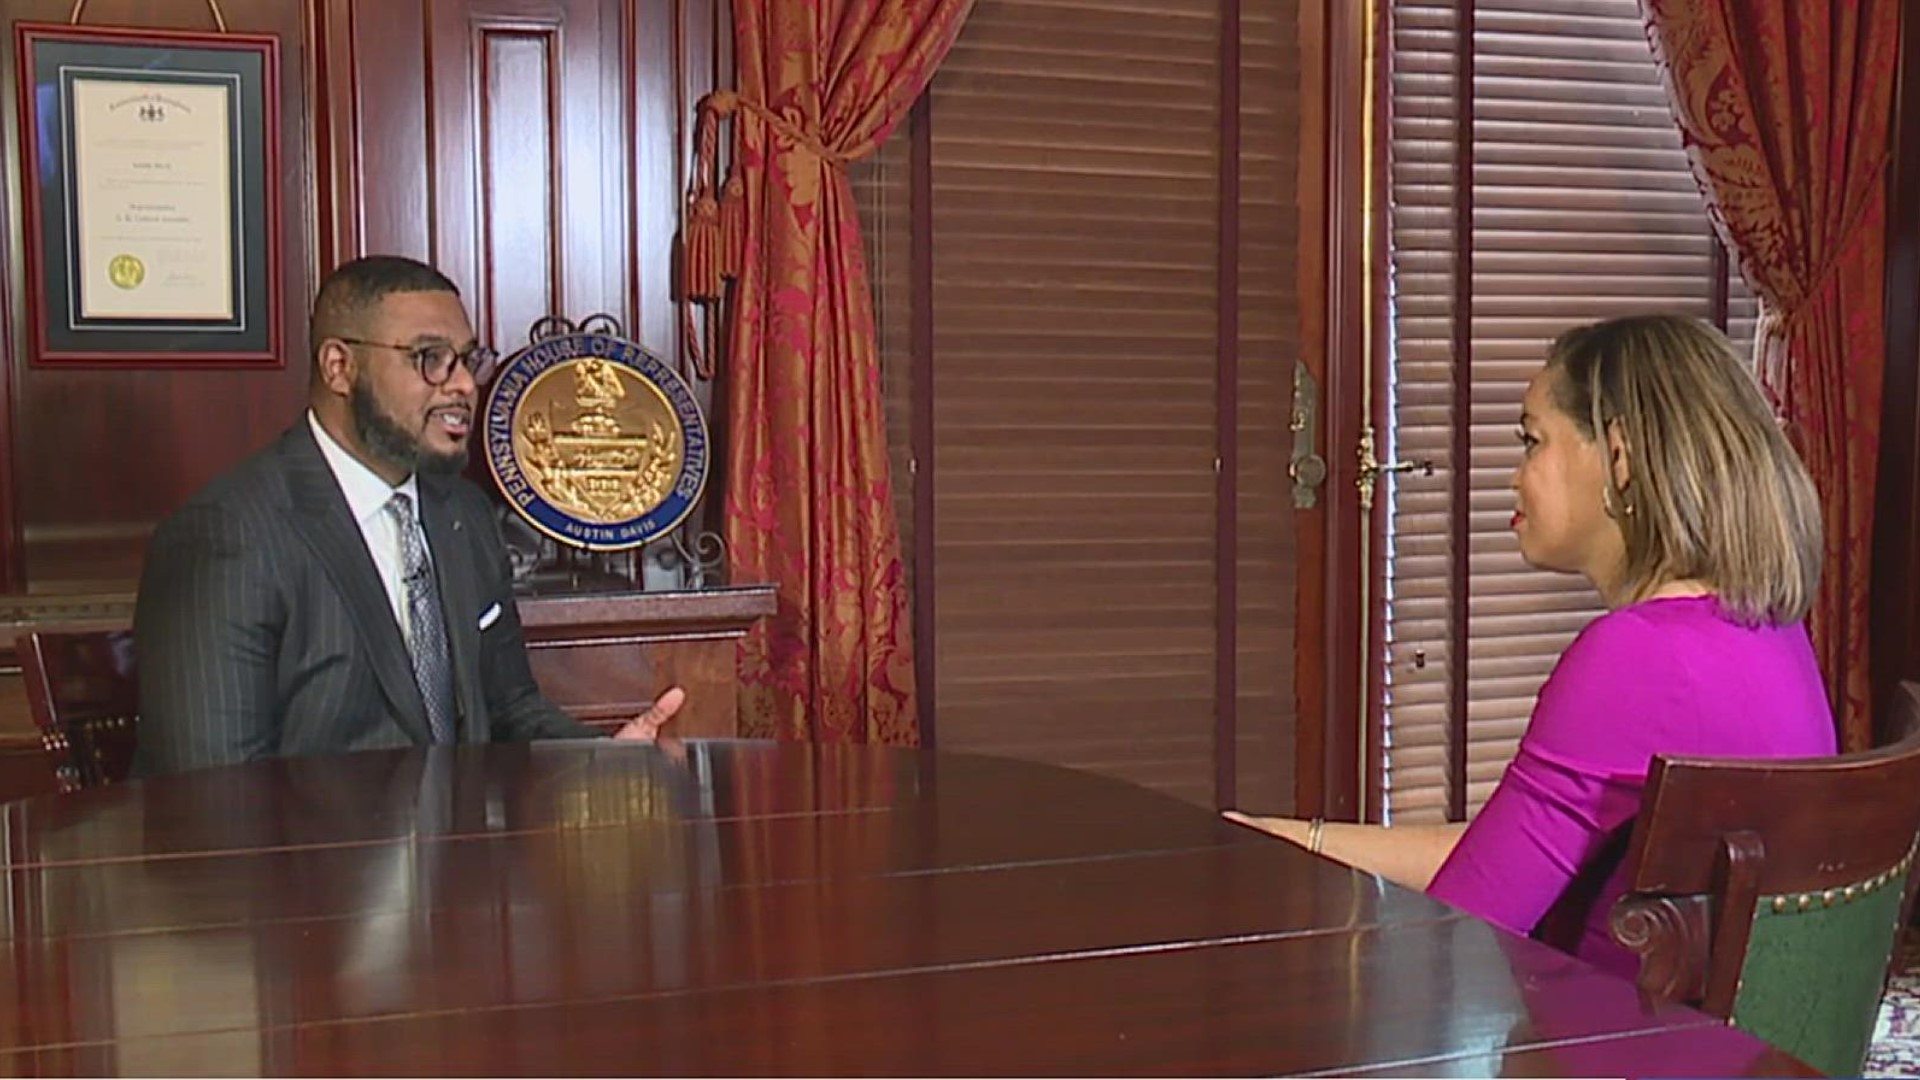 PA's new lt. governor has already made a name for himself in politics. Newswatch 16's Lisa Washington went to Harrisburg to talk to Austin Davis about his new role.